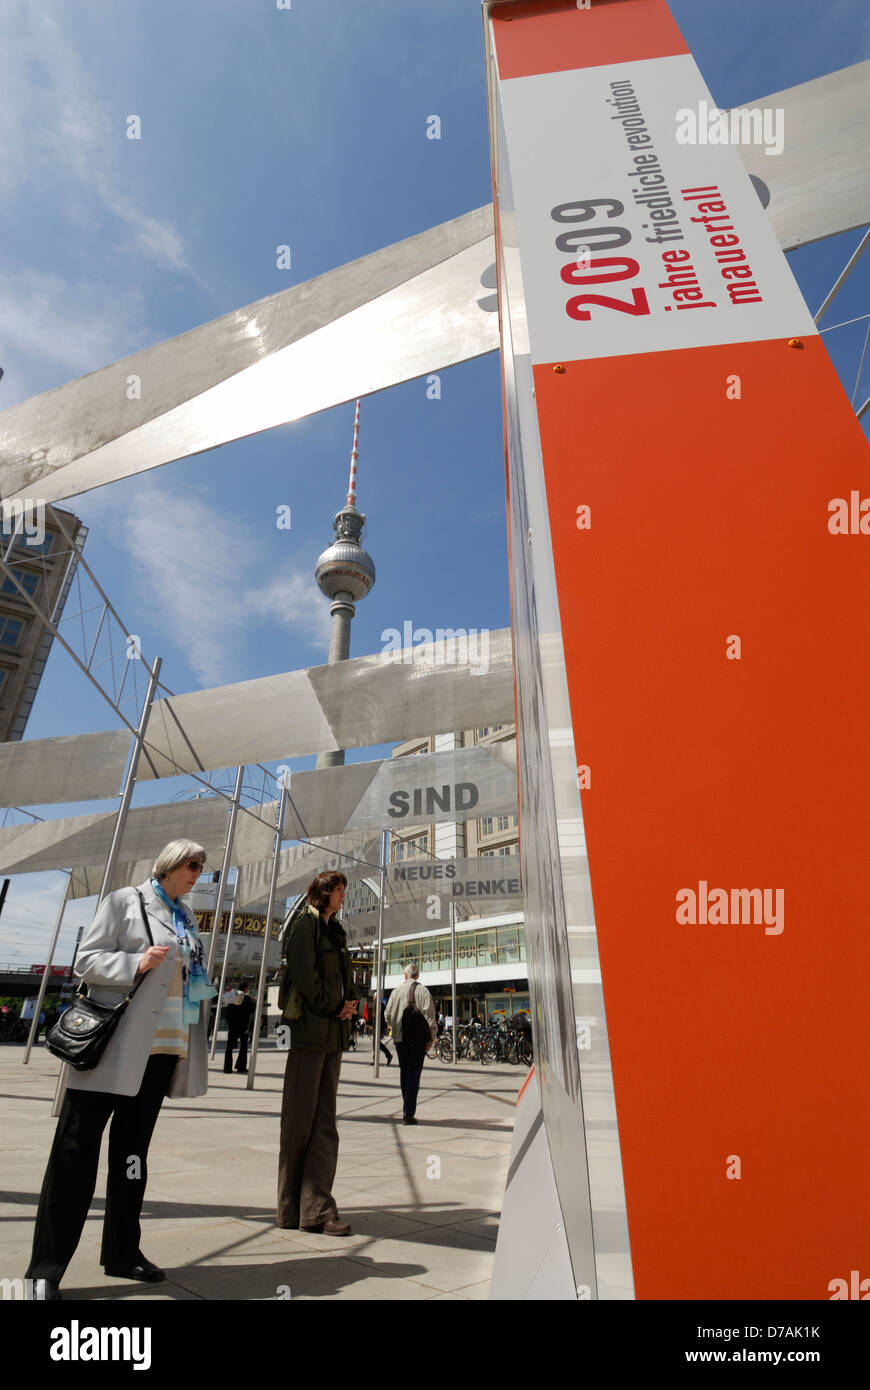 Exhibition on Alexanderplatz commemorating 20 years since the fall of the Berlin wall, Berlin Germany. Stock Photo